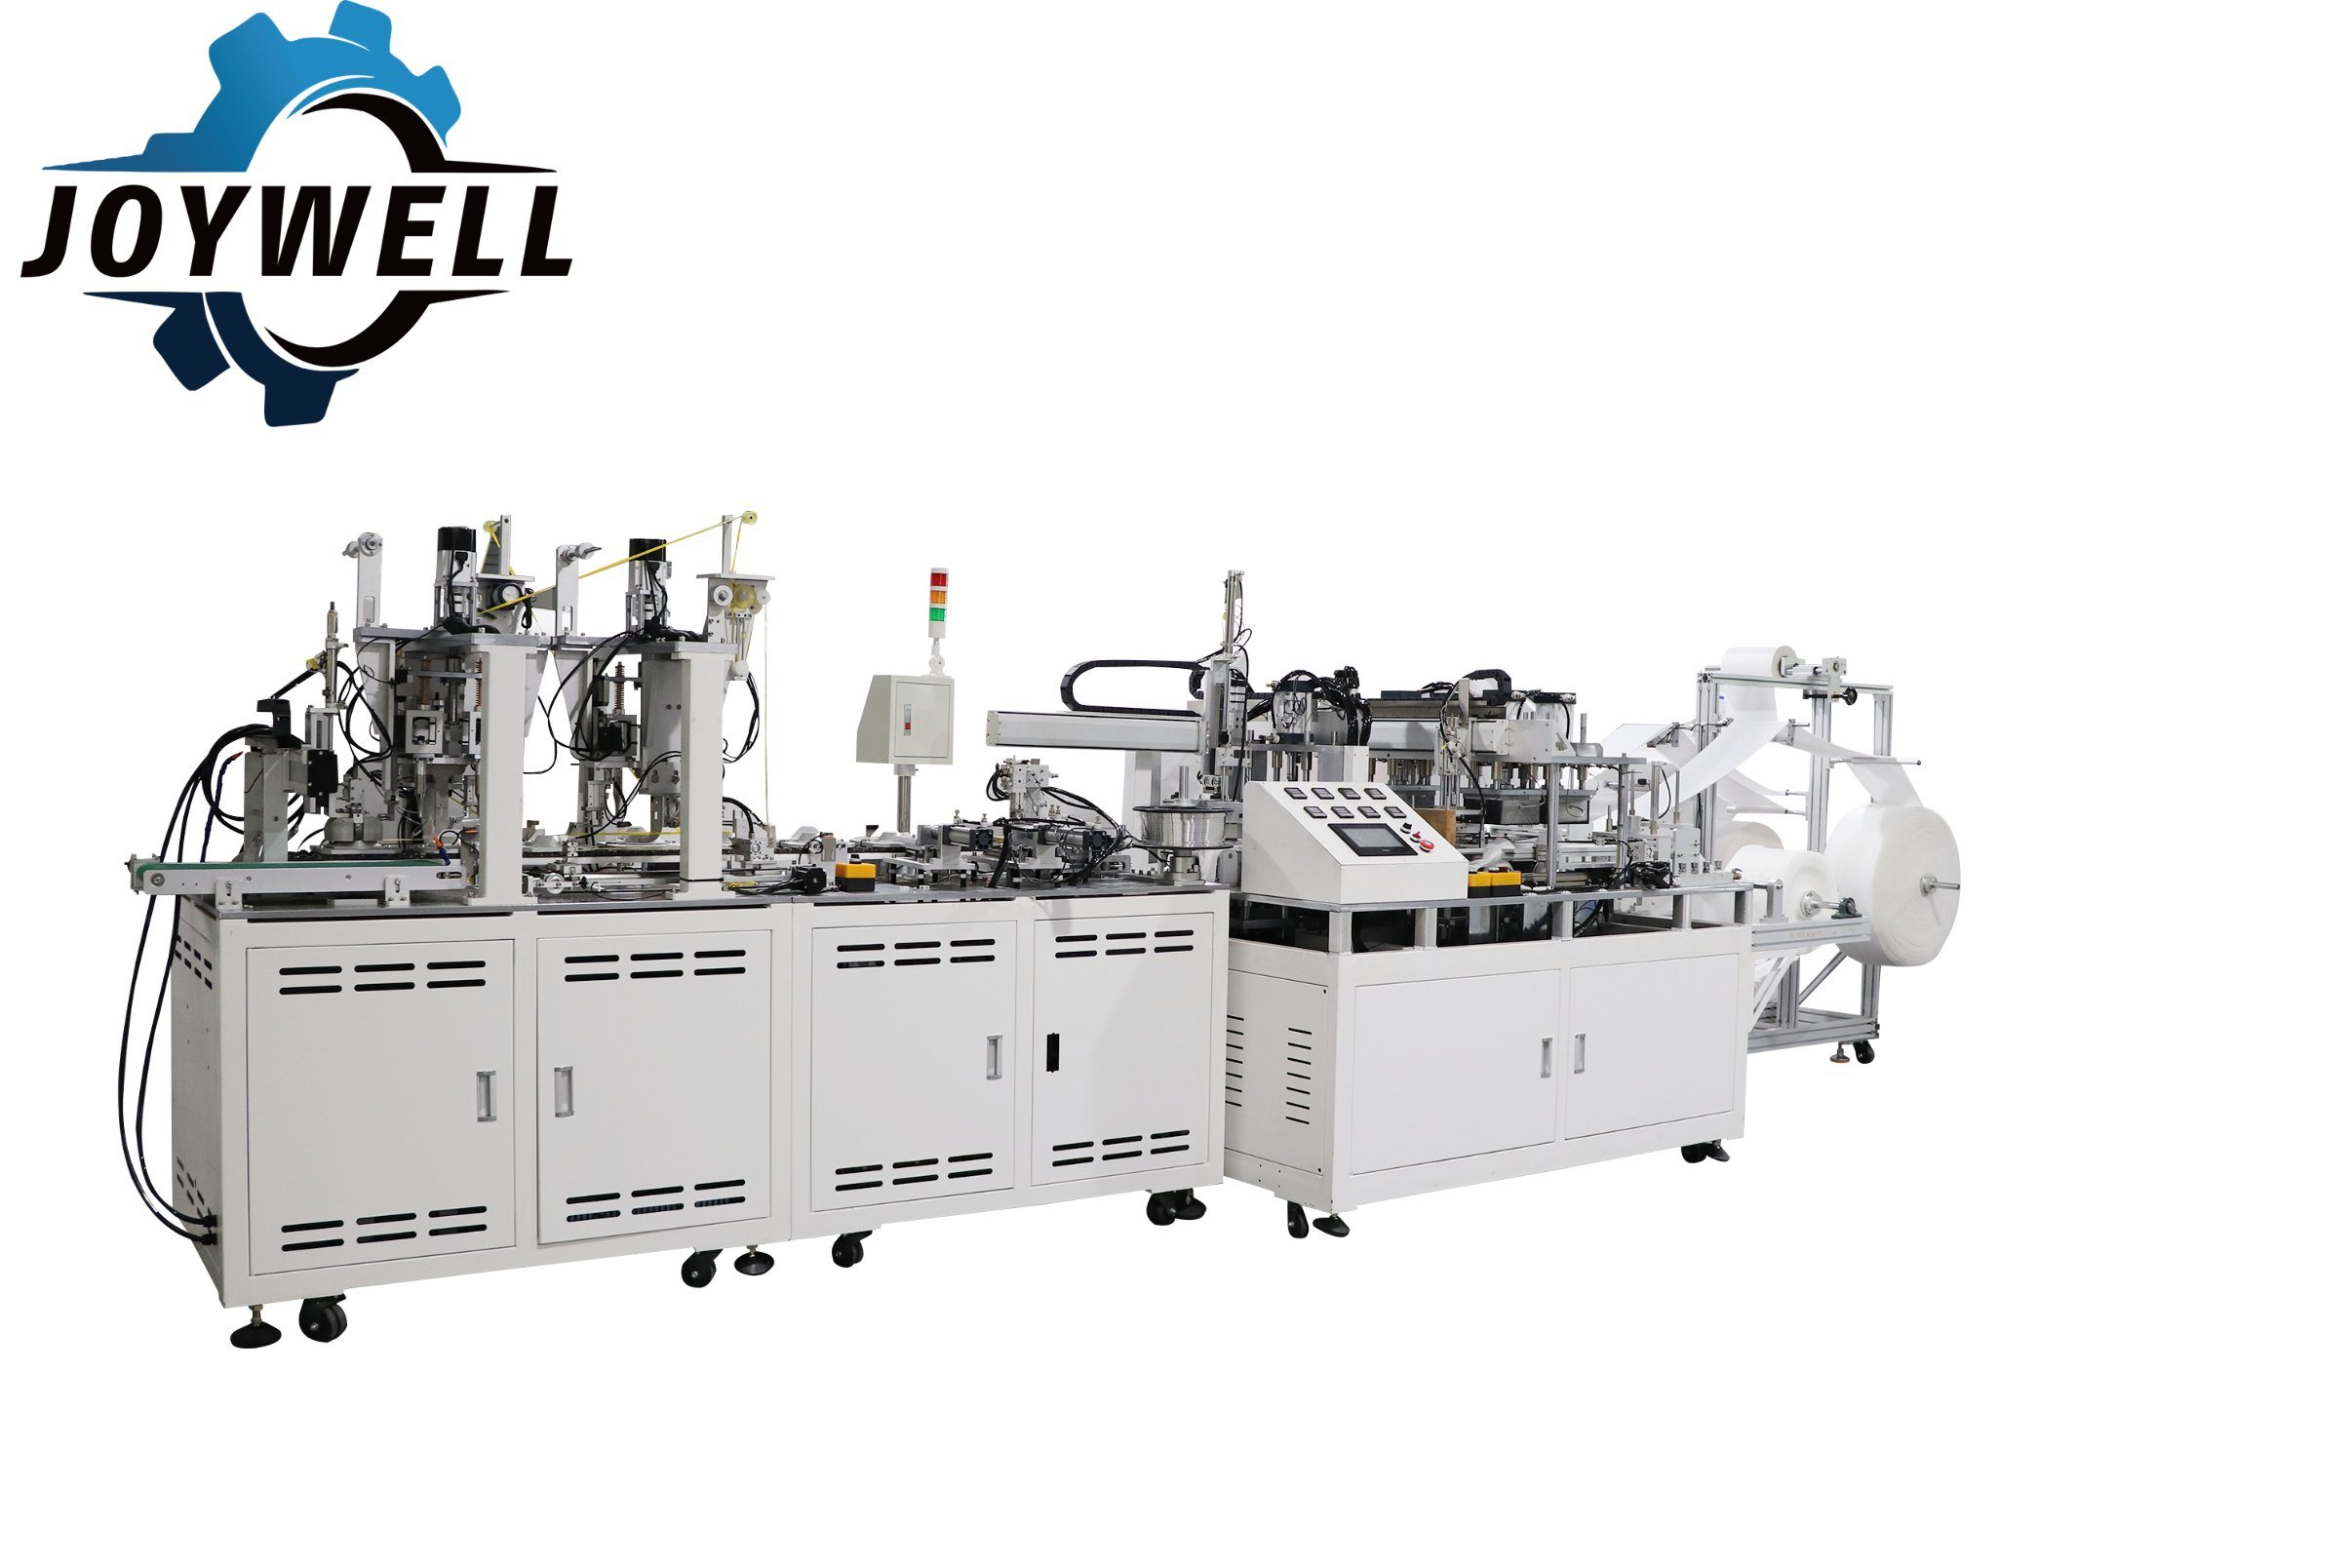 Cup-Shaped Cold Pressing Mask Forming Machine Made in China